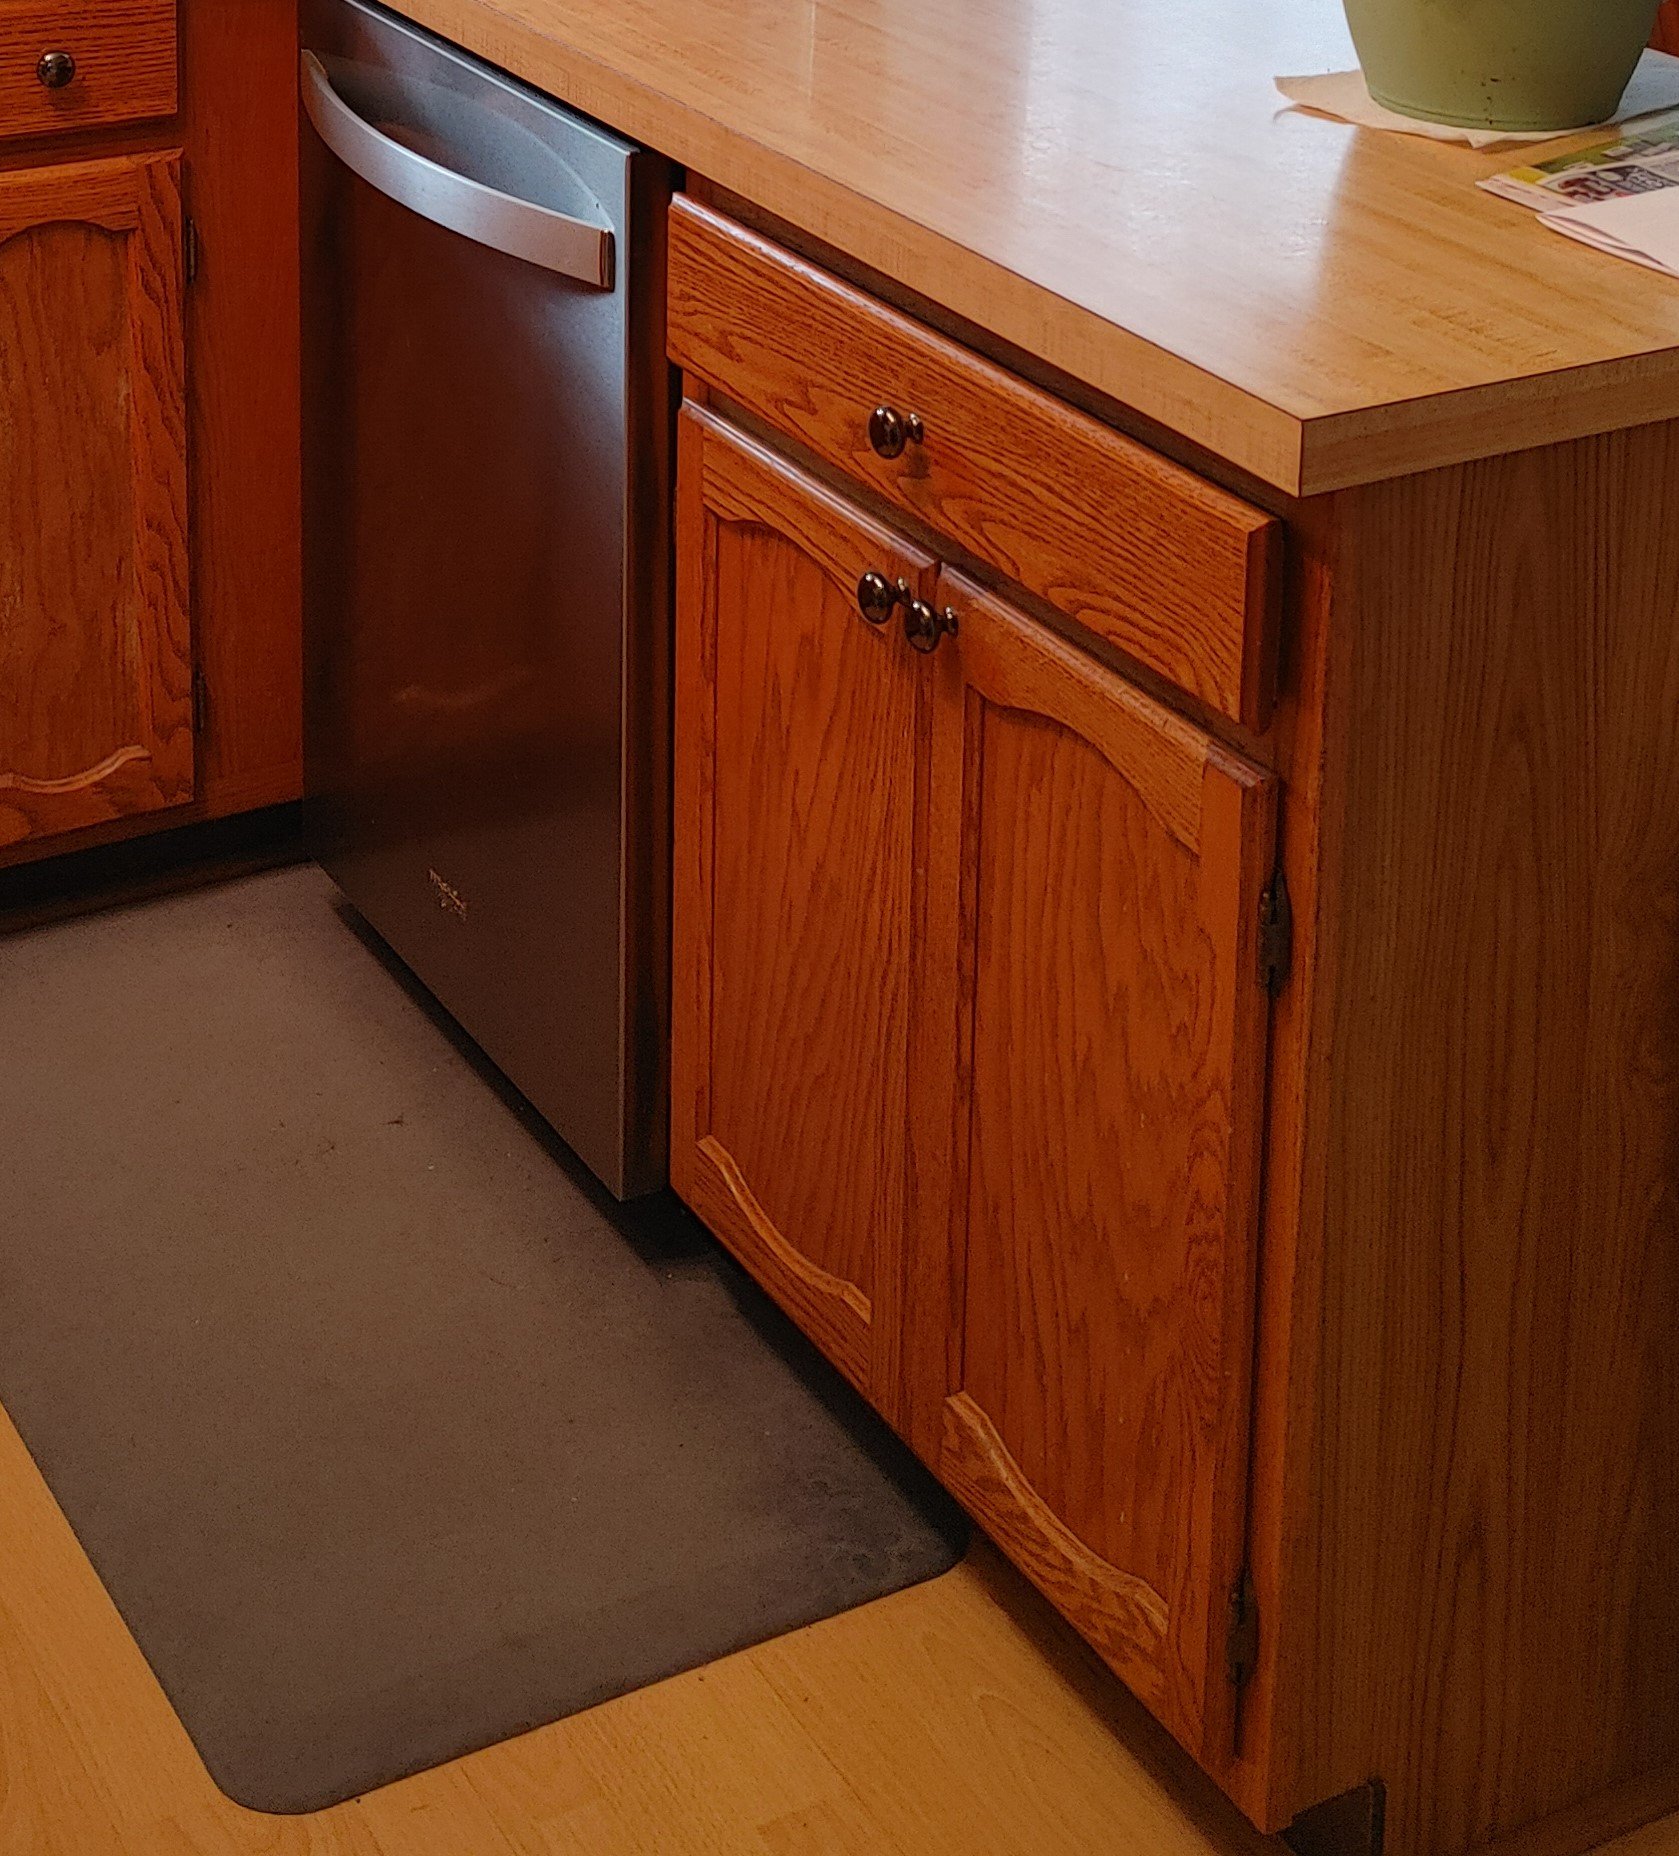 Dated Honey Oak Kitchen Cabinet Doors with Exposed Hinges